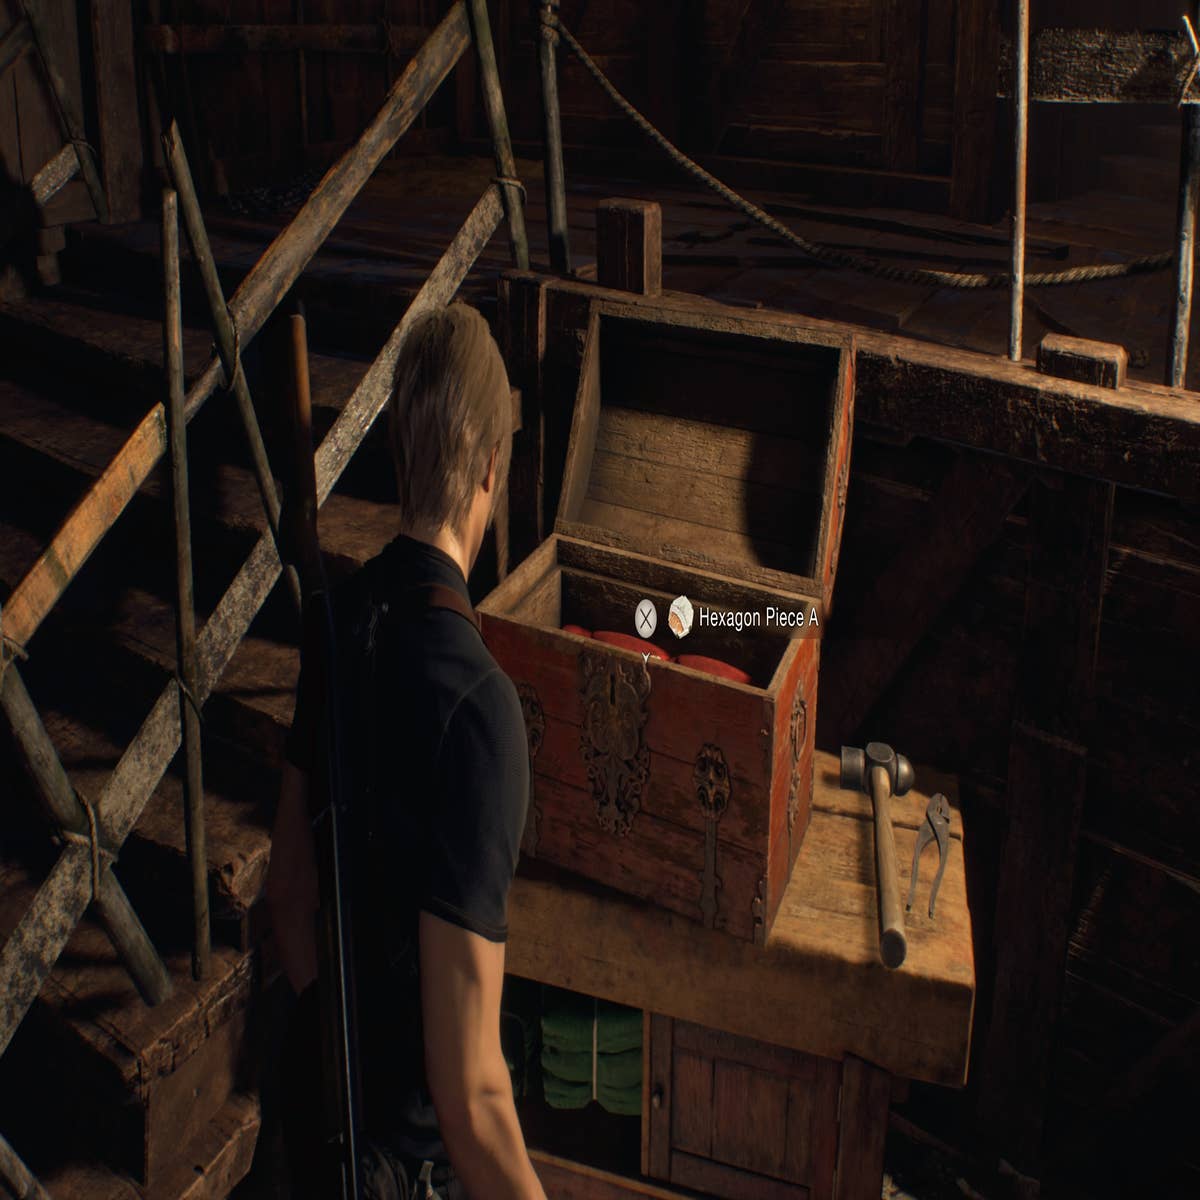 How to solve the Hexagon Puzzle in 'Resident Evil 4 Remake